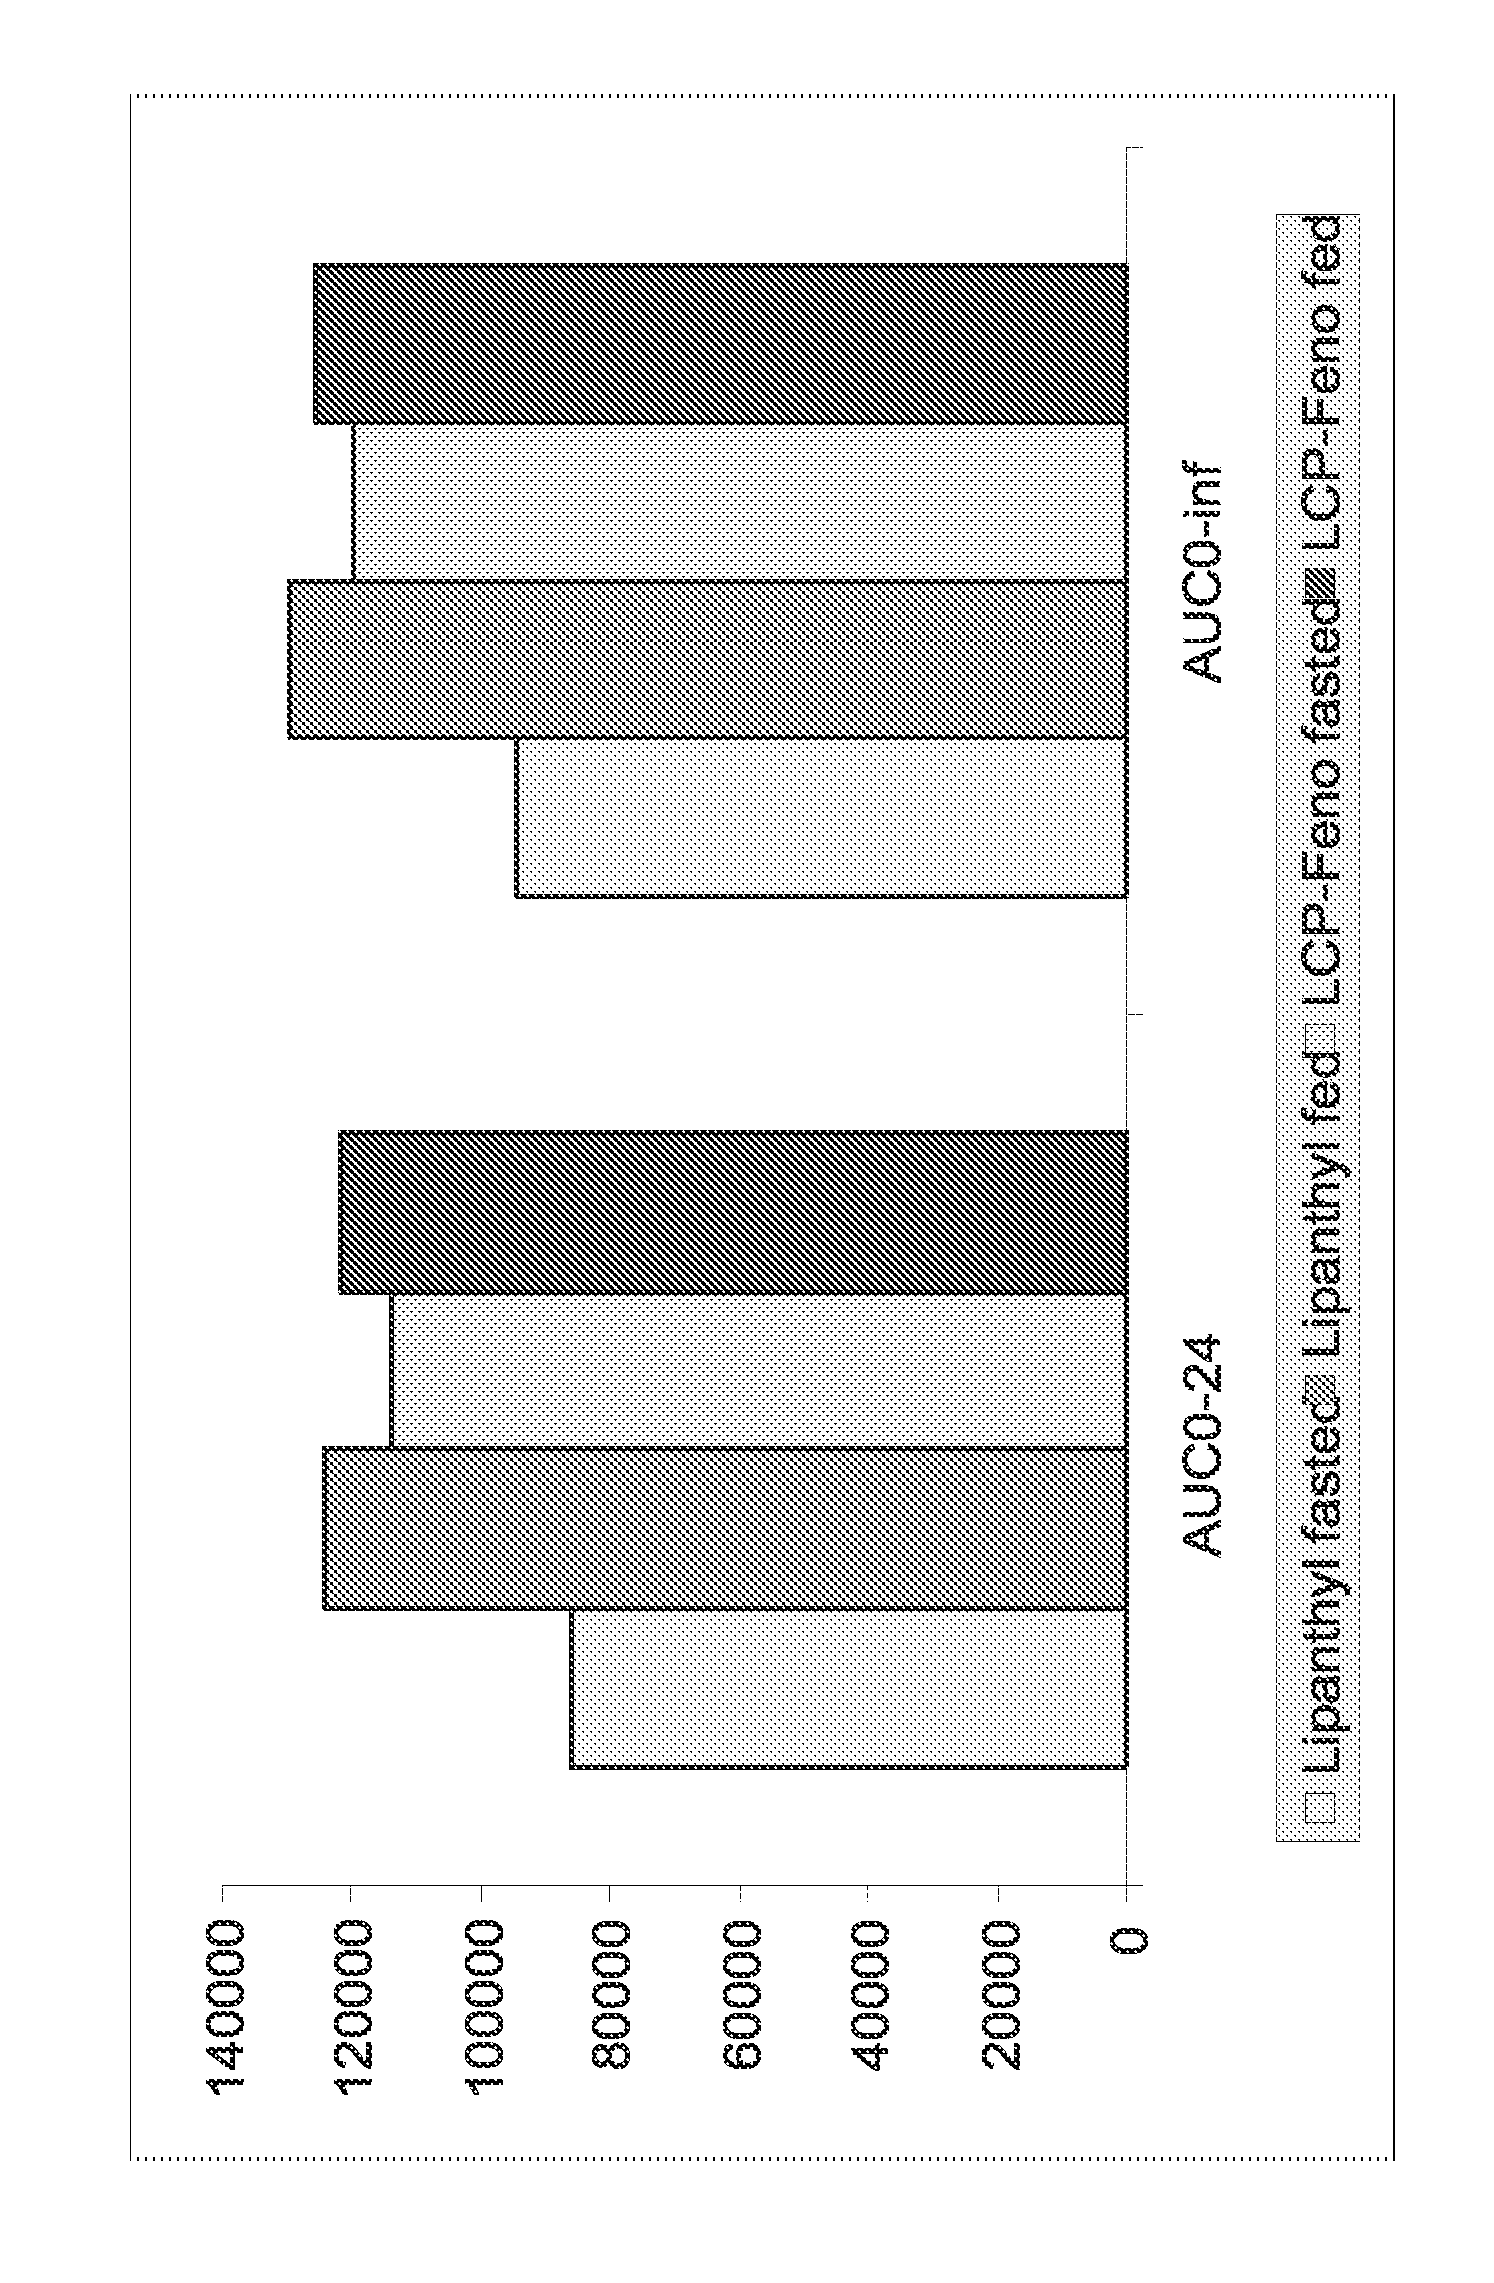 Pharmaceutical compositions comprising fenofibrate and atorvastatin